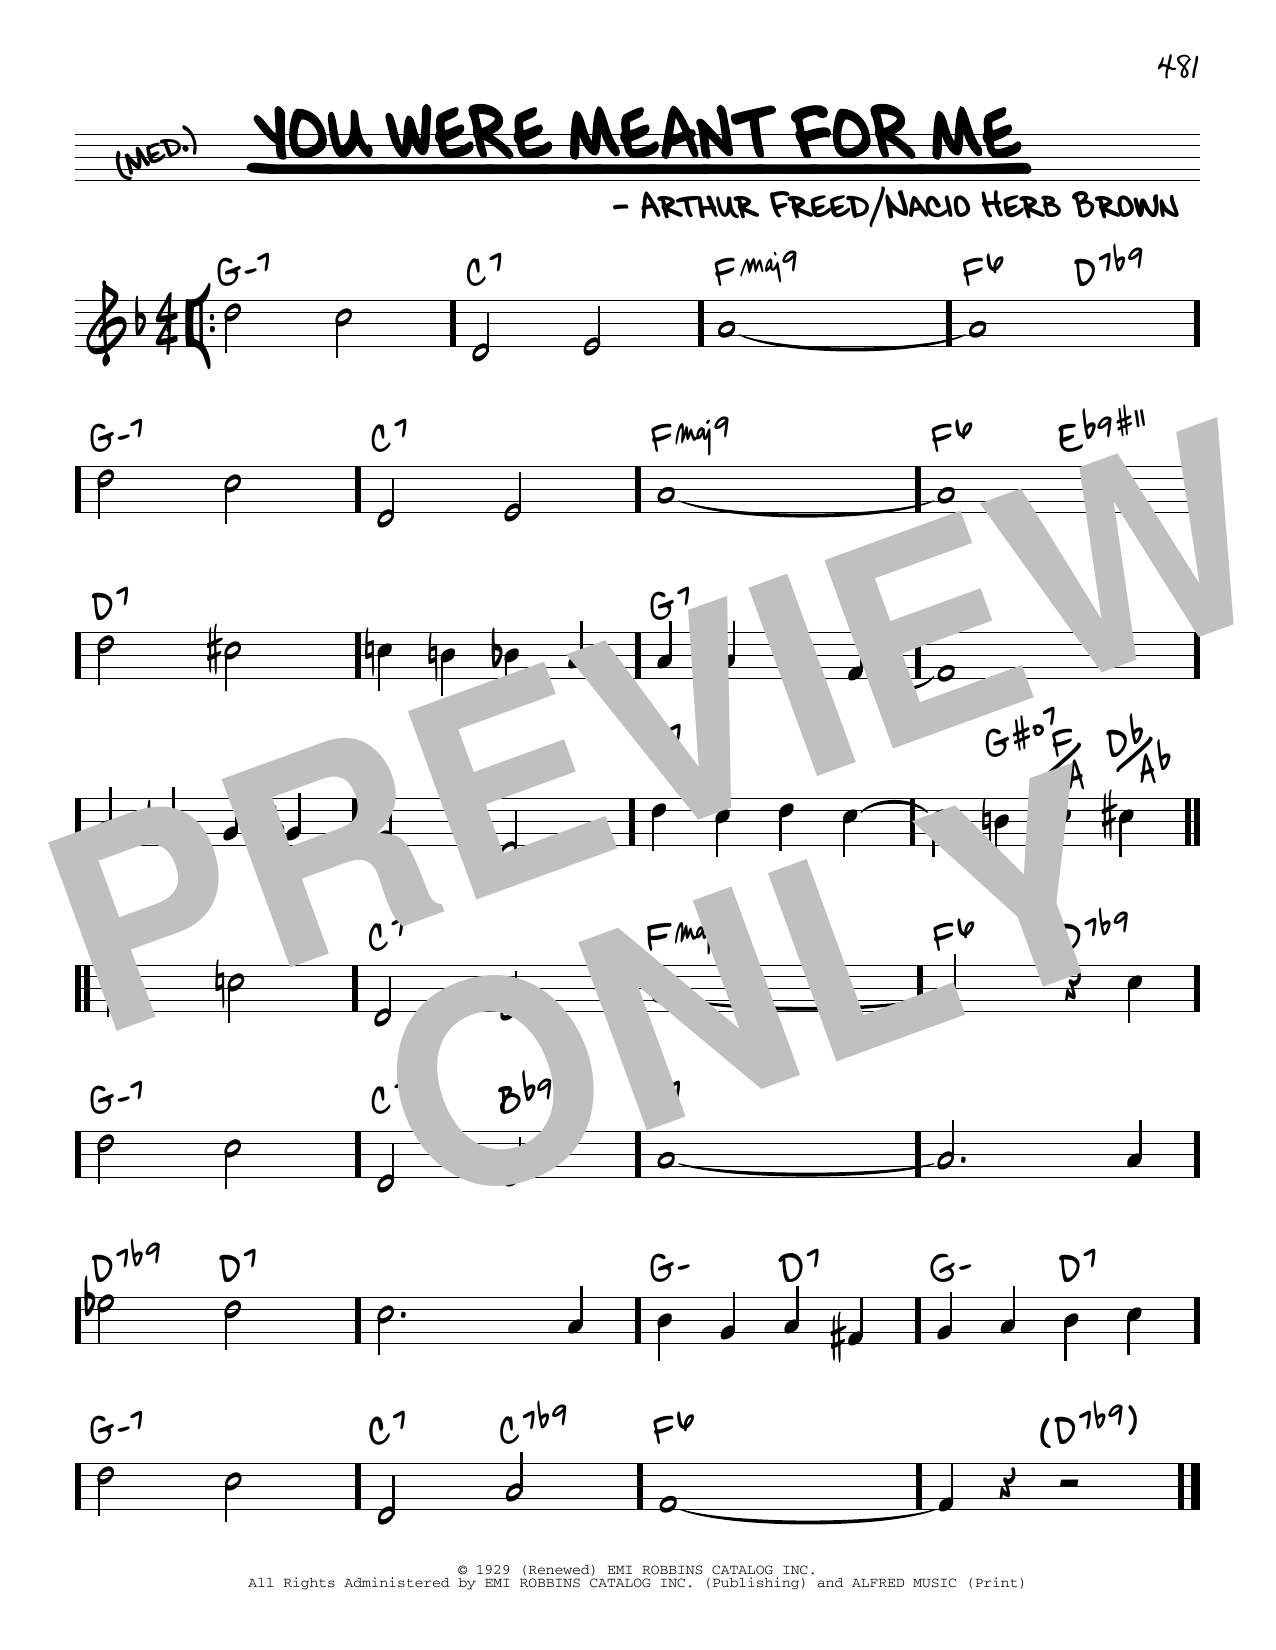 Download Arthur Freed You Were Meant For Me Sheet Music